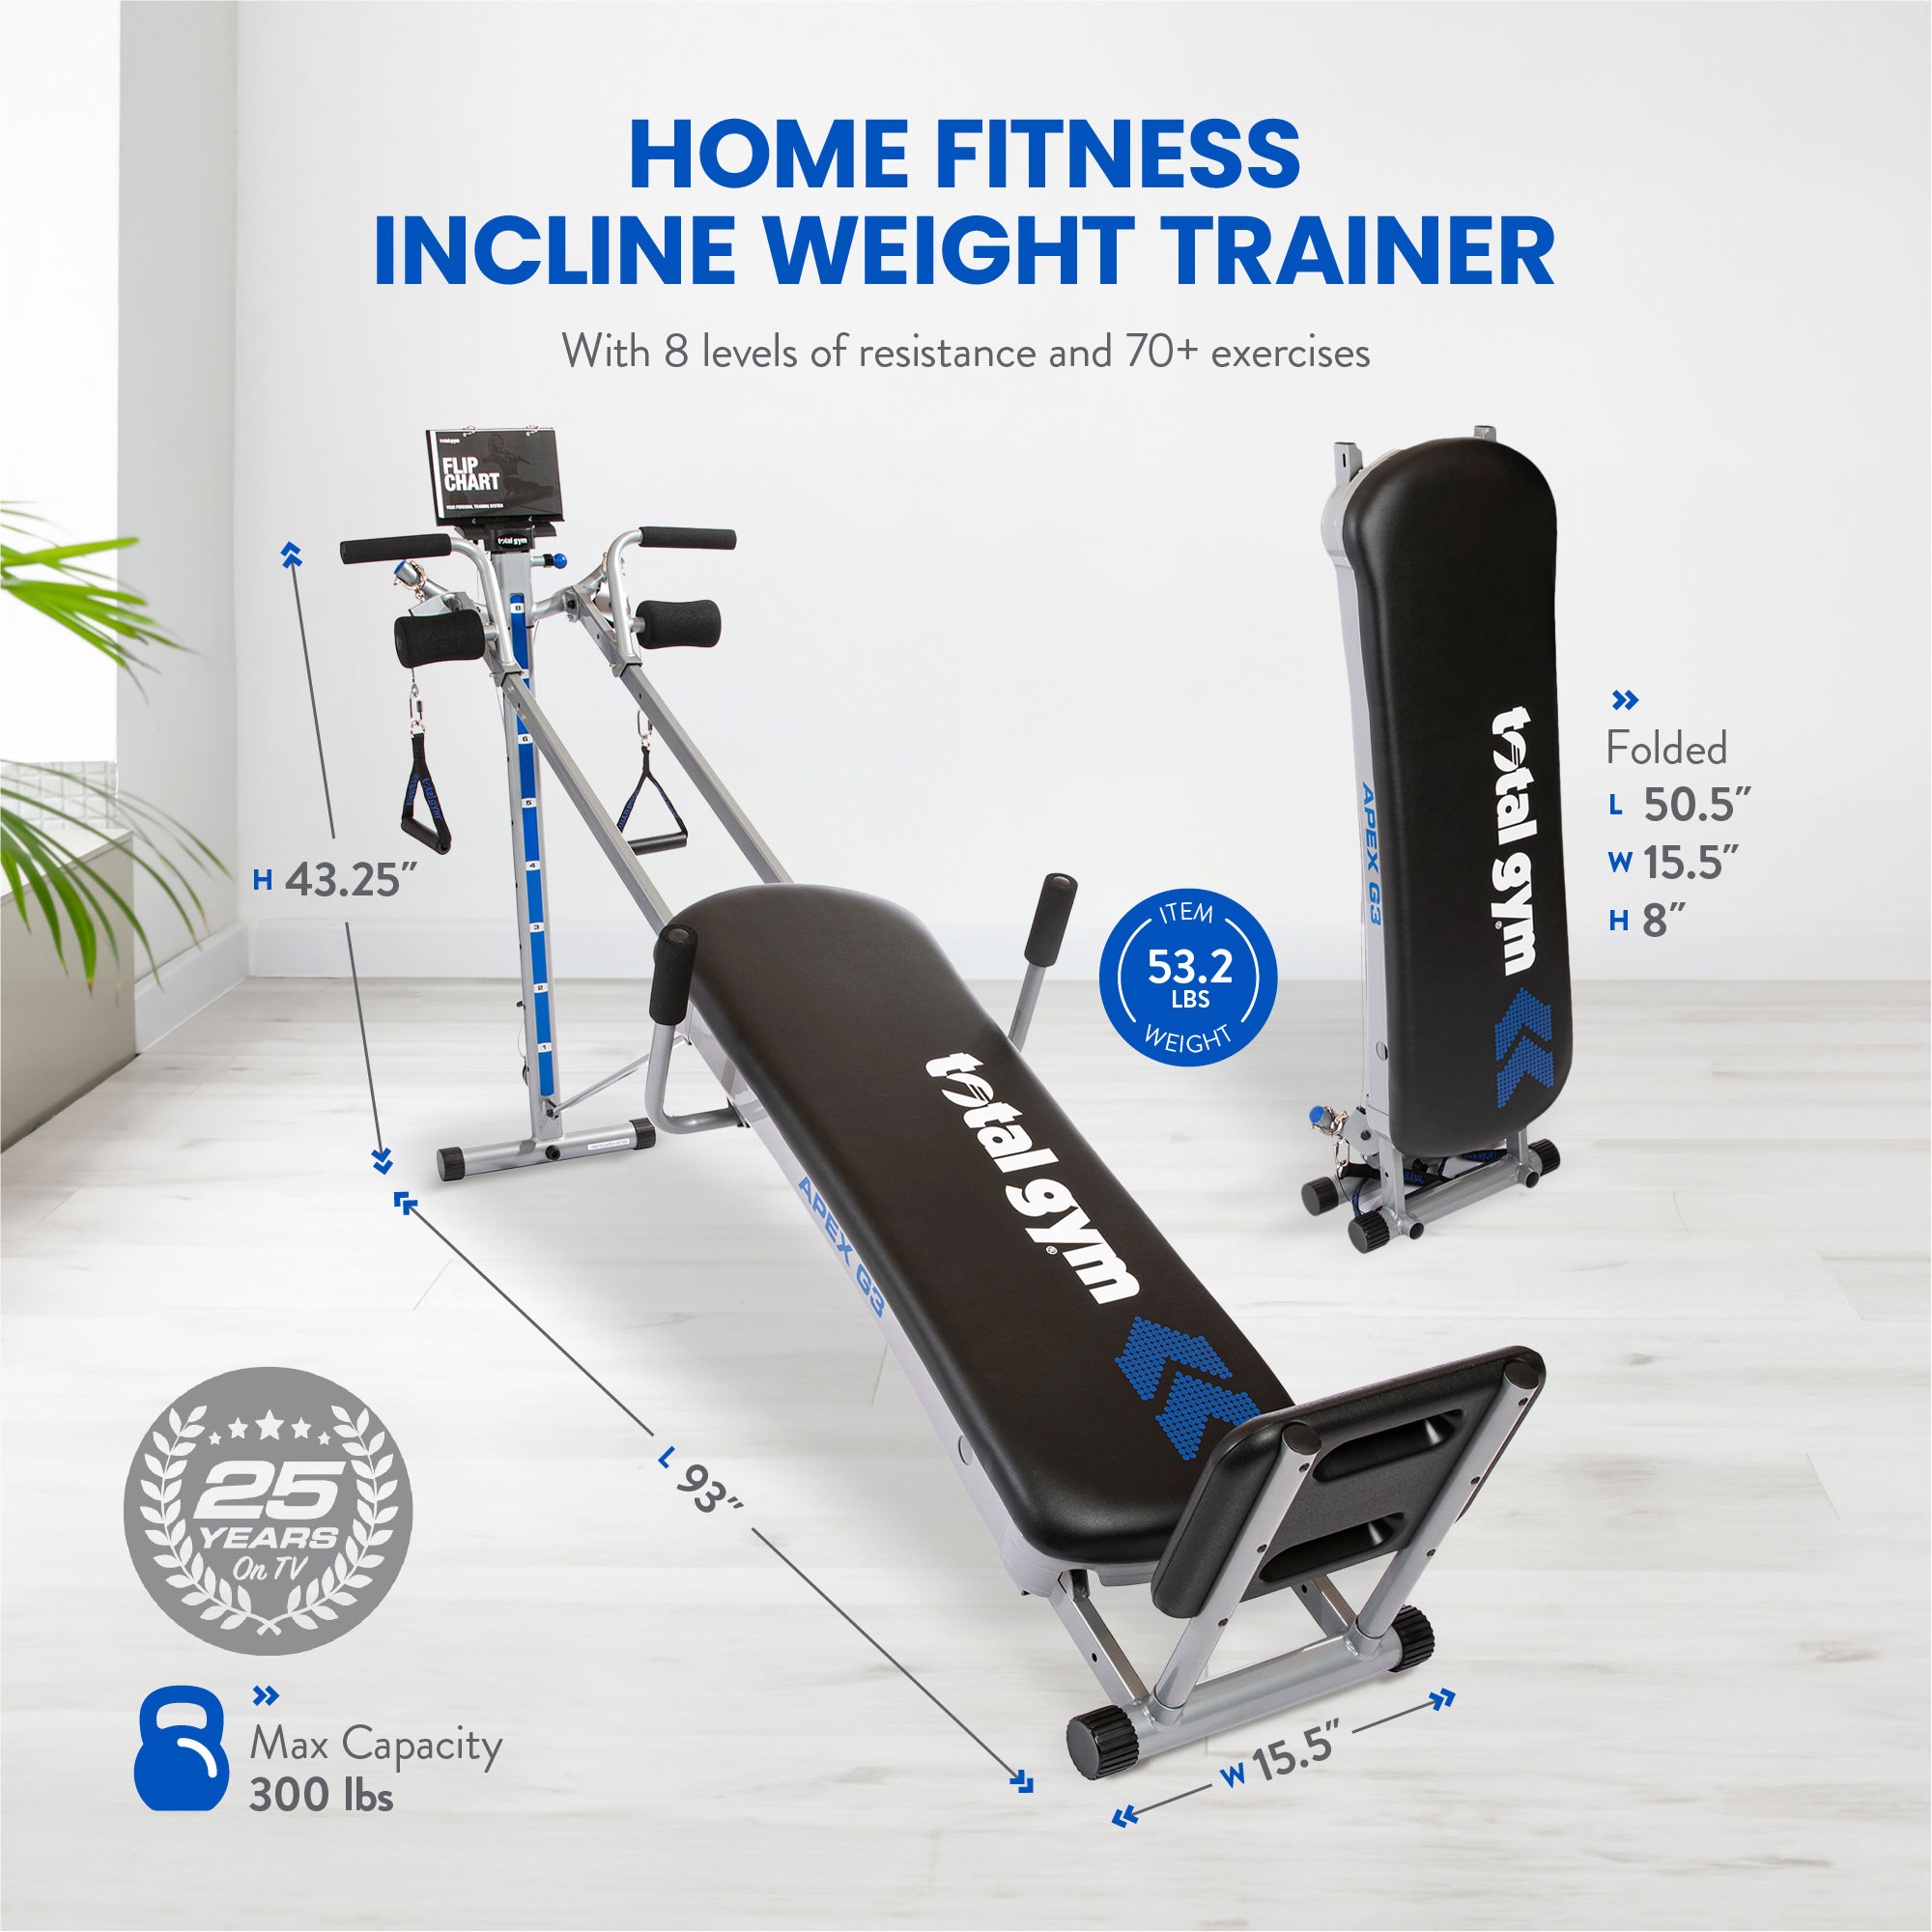 Total Gym APEX G3 Fitness Incline Weight Trainer with 8 Resistance Levels - image 3 of 11